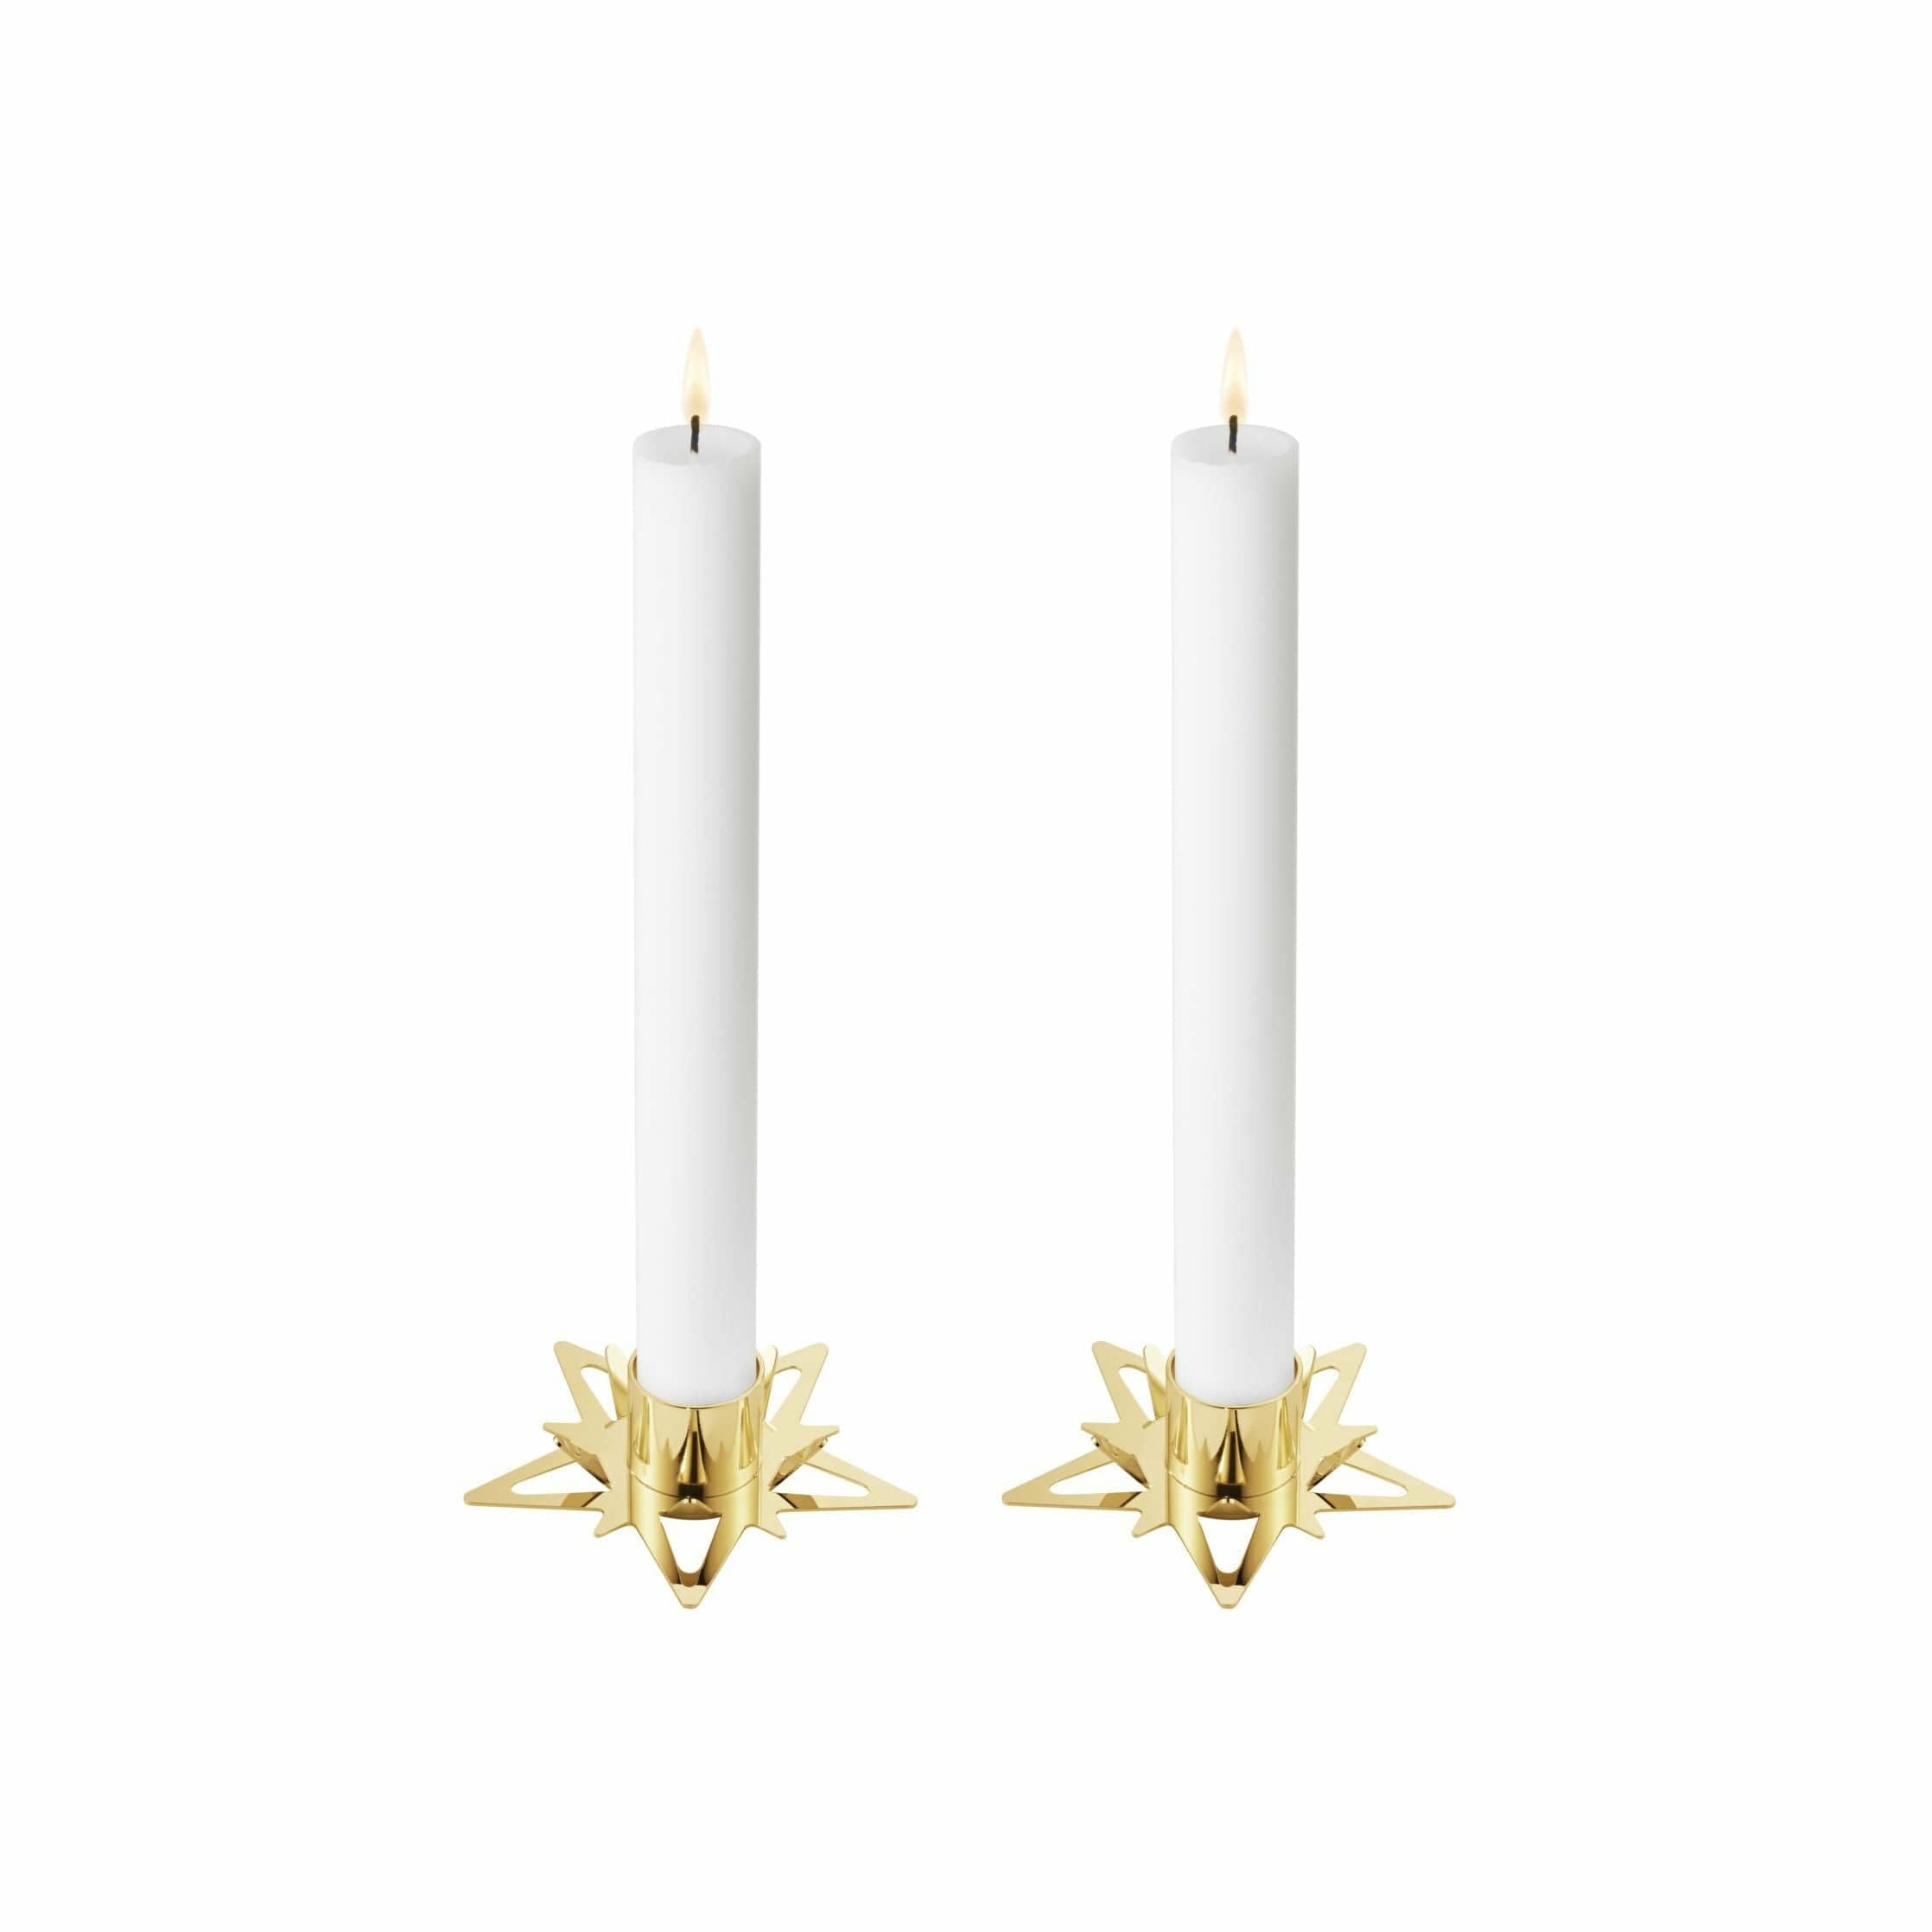 Georg Jensen Classic Christman Star Star Candle Candle Holder for Rod Candles，2套，镀金